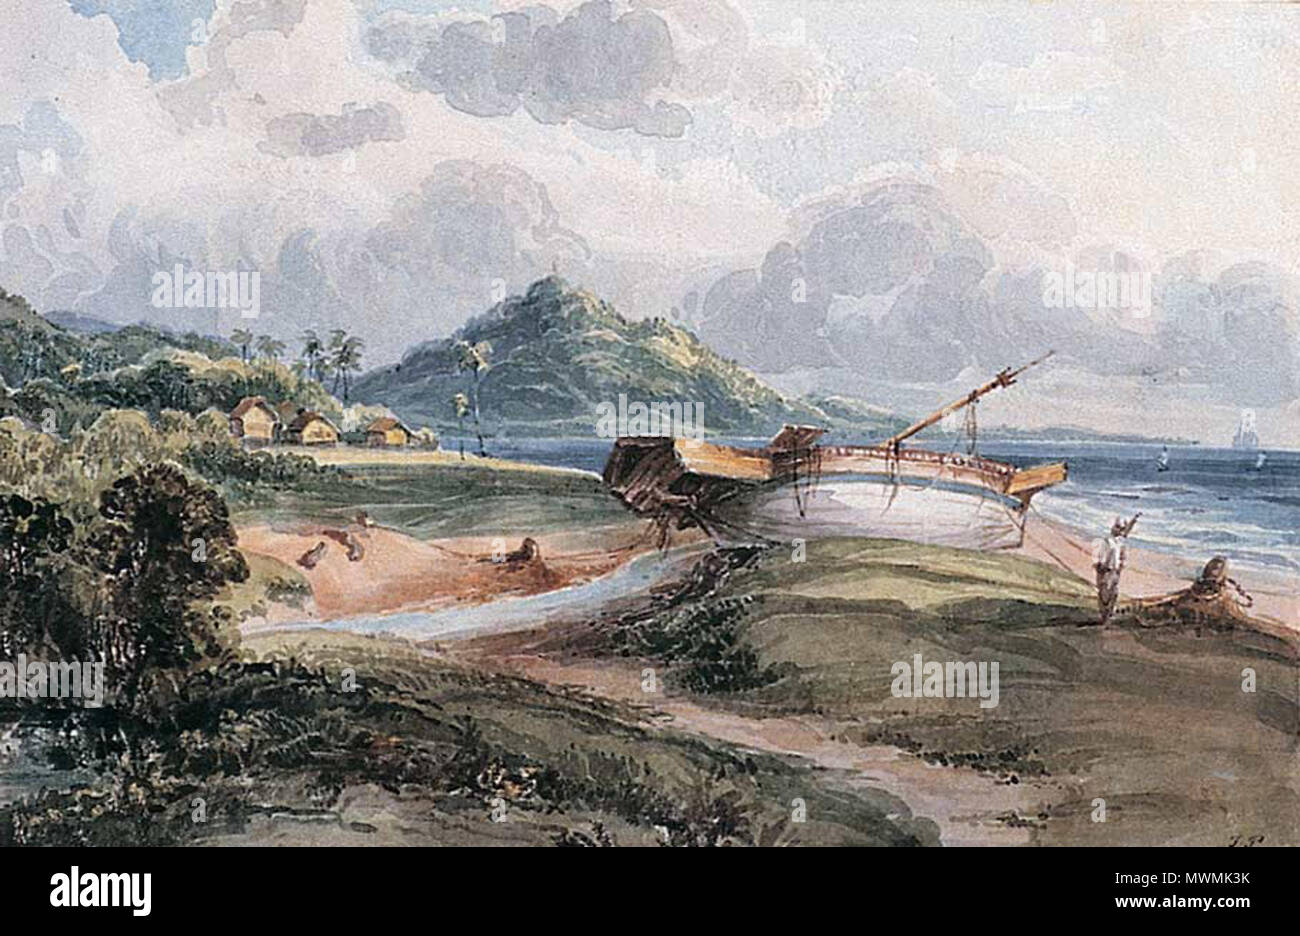 . English: Source: http://www.penangmuseum.gov.my/museum/sites/default/files/portfolio images/519.jpg Title: Mount Erskine Media: Watercolour Width: 213 mm (8.4 in) Height: 138 mm (5.4 in) Year of creation: 1824 Mode of acquisition: Purchased Spink & son 1981 . 1824. Penang State Museum and Art Gallery 476 Penang Museum historical painting 519 Stock Photo